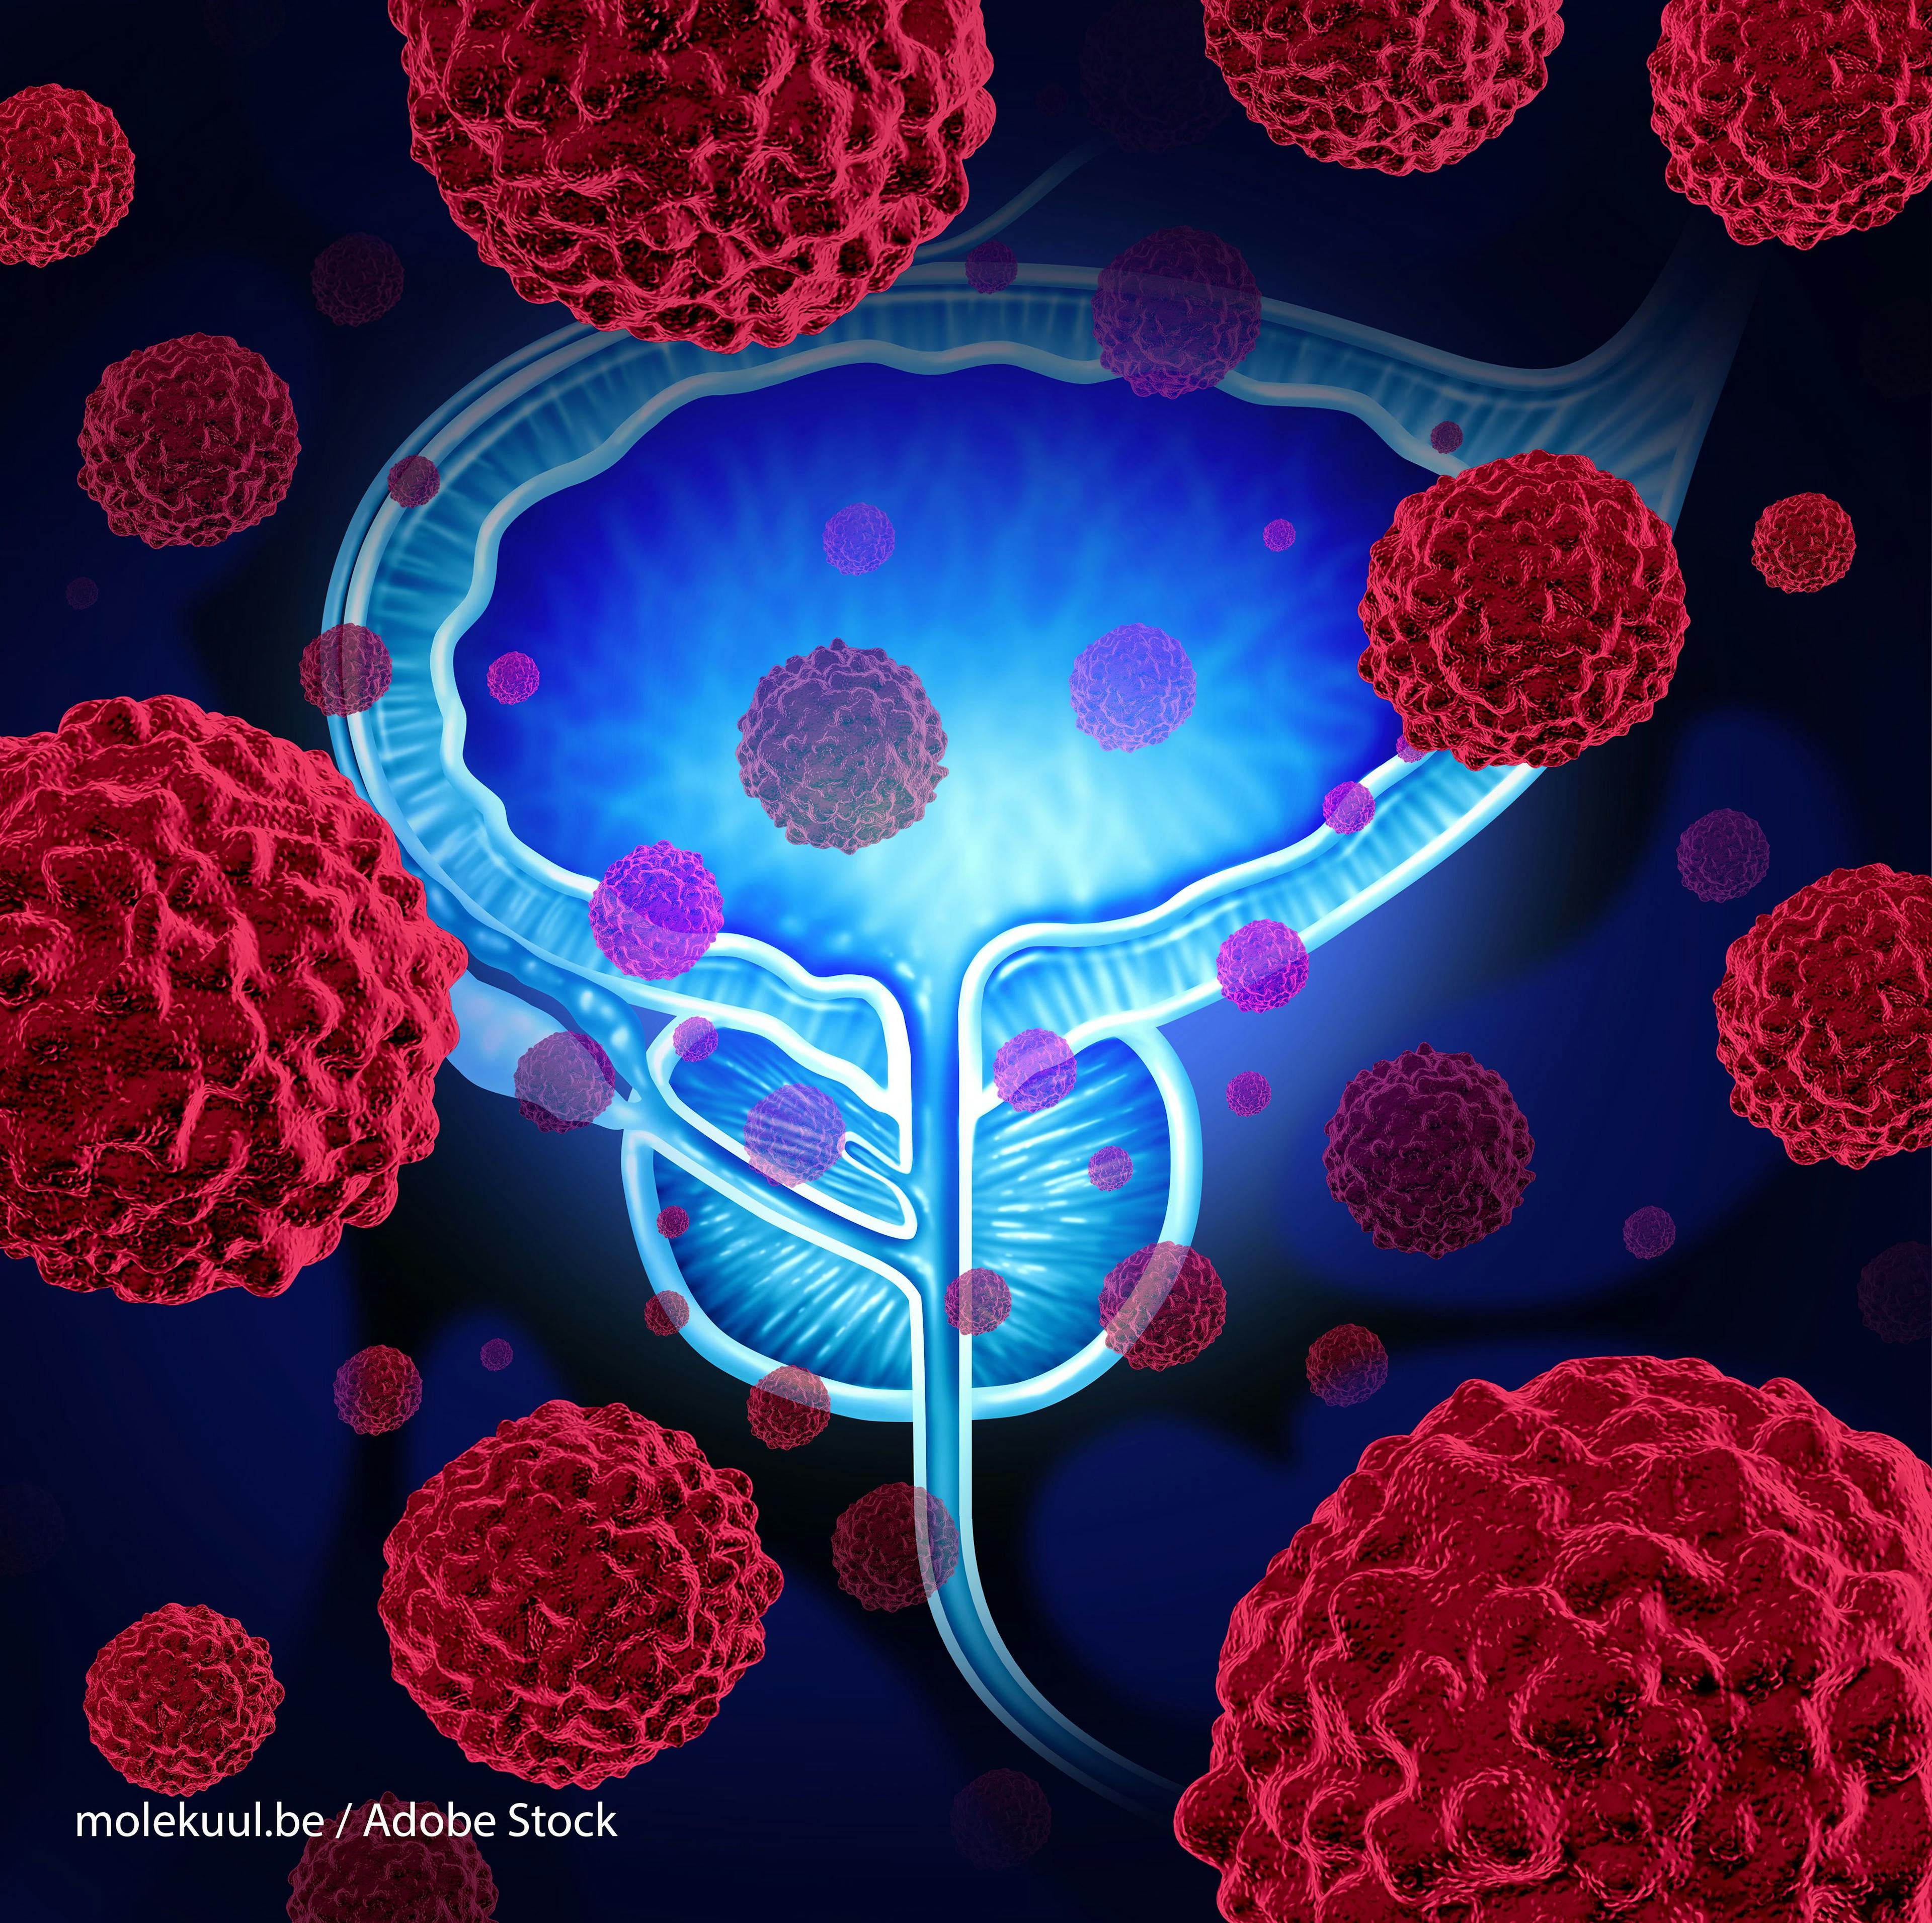 Potential Surrogate Endpoint in Prostate Cancer to Speed Up Clinical Trials